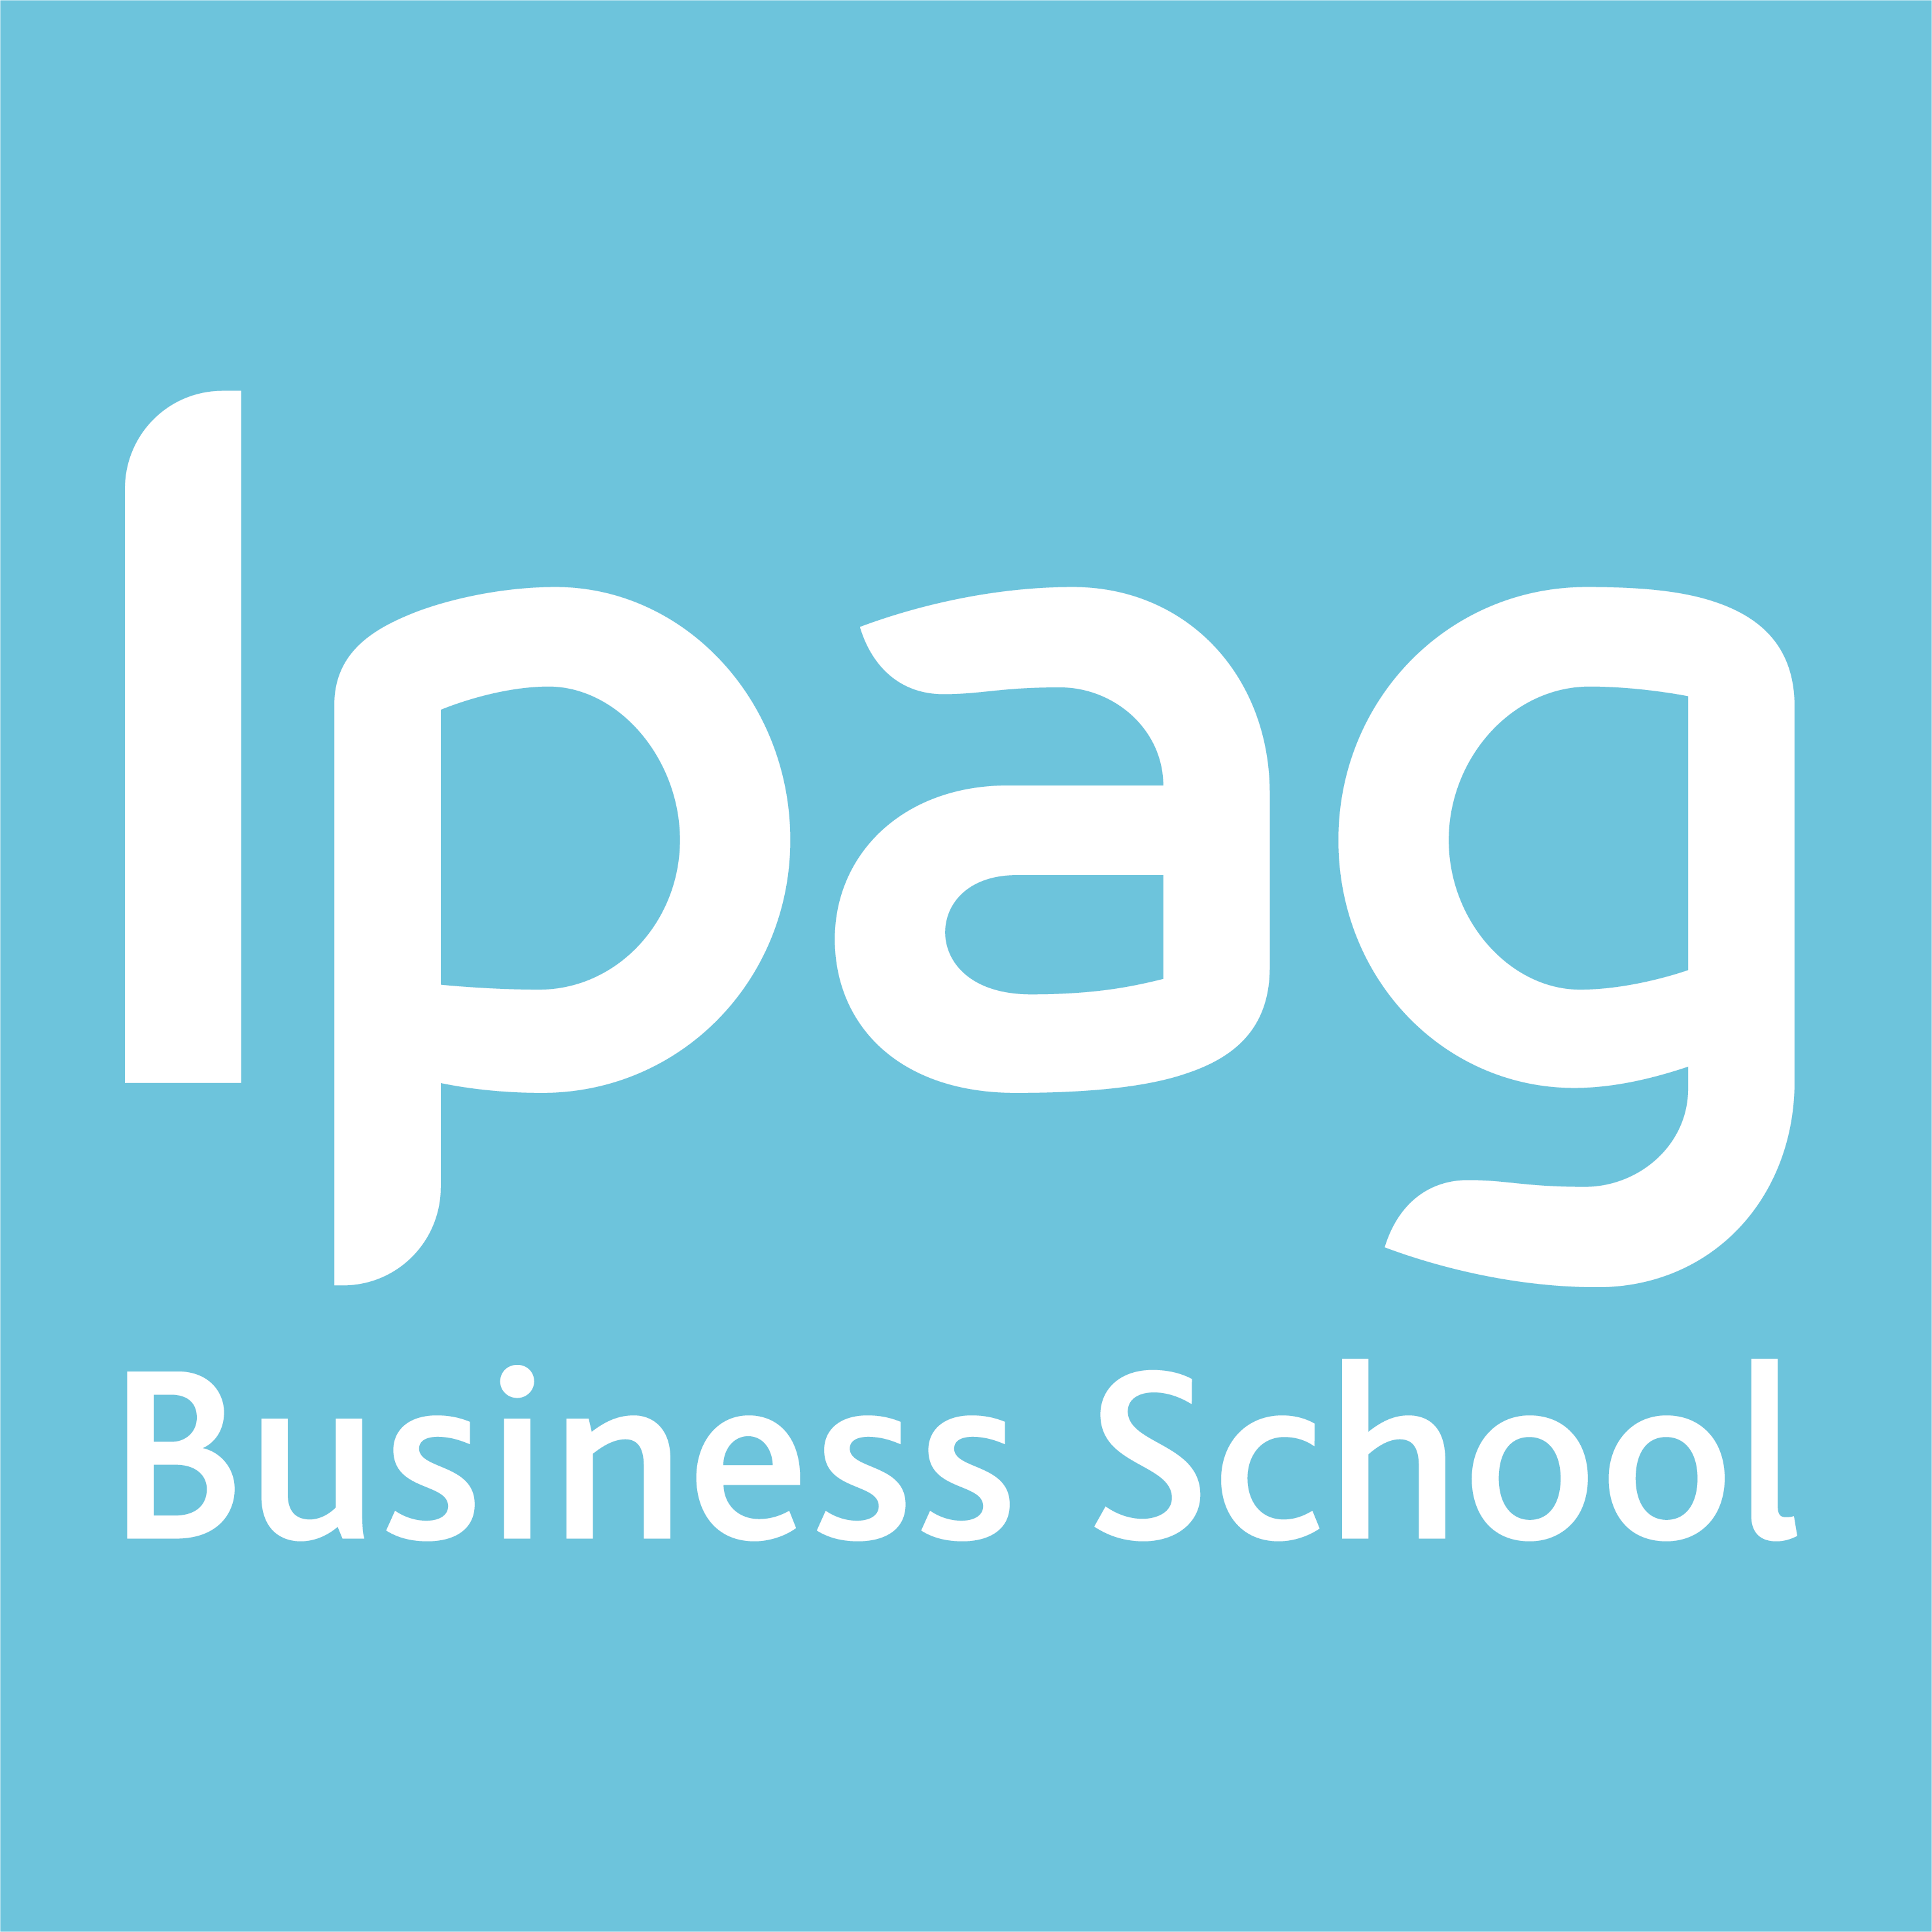 IPAG Business School